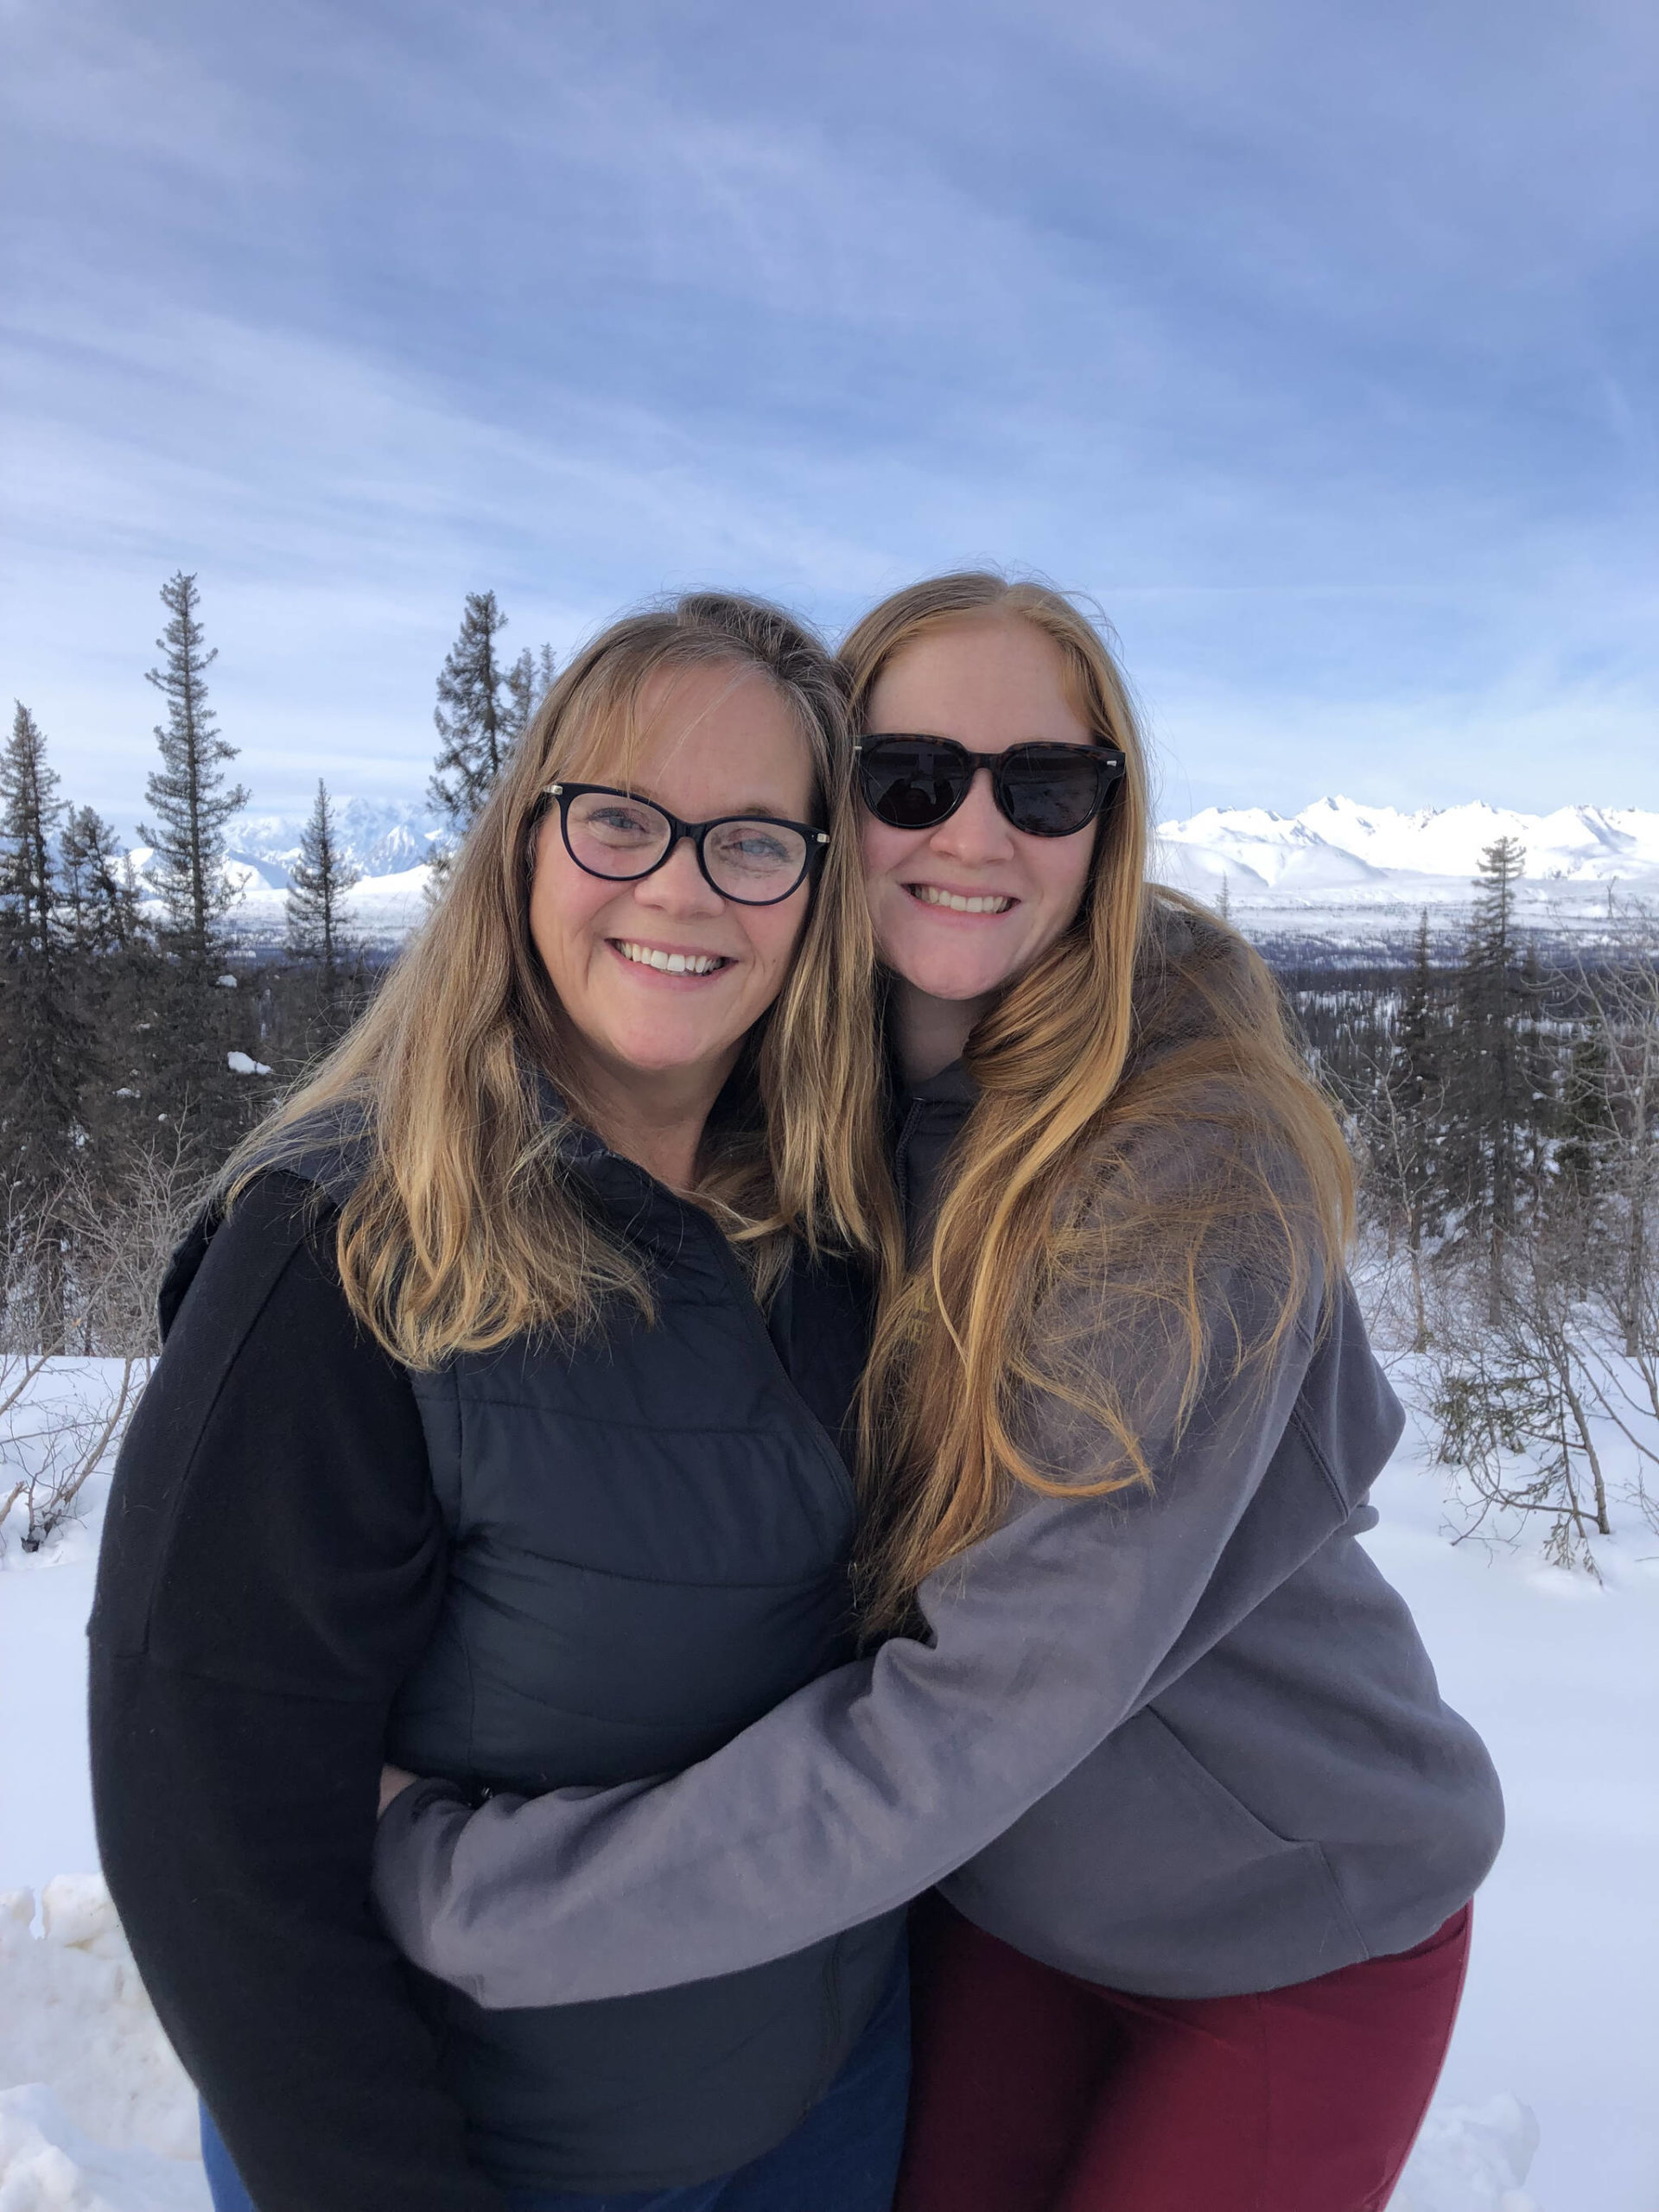 My mom Alex Botello and I take a photo on the way to Denali National Park on Saturday, Feb. 26, 2022. (Photo provided)